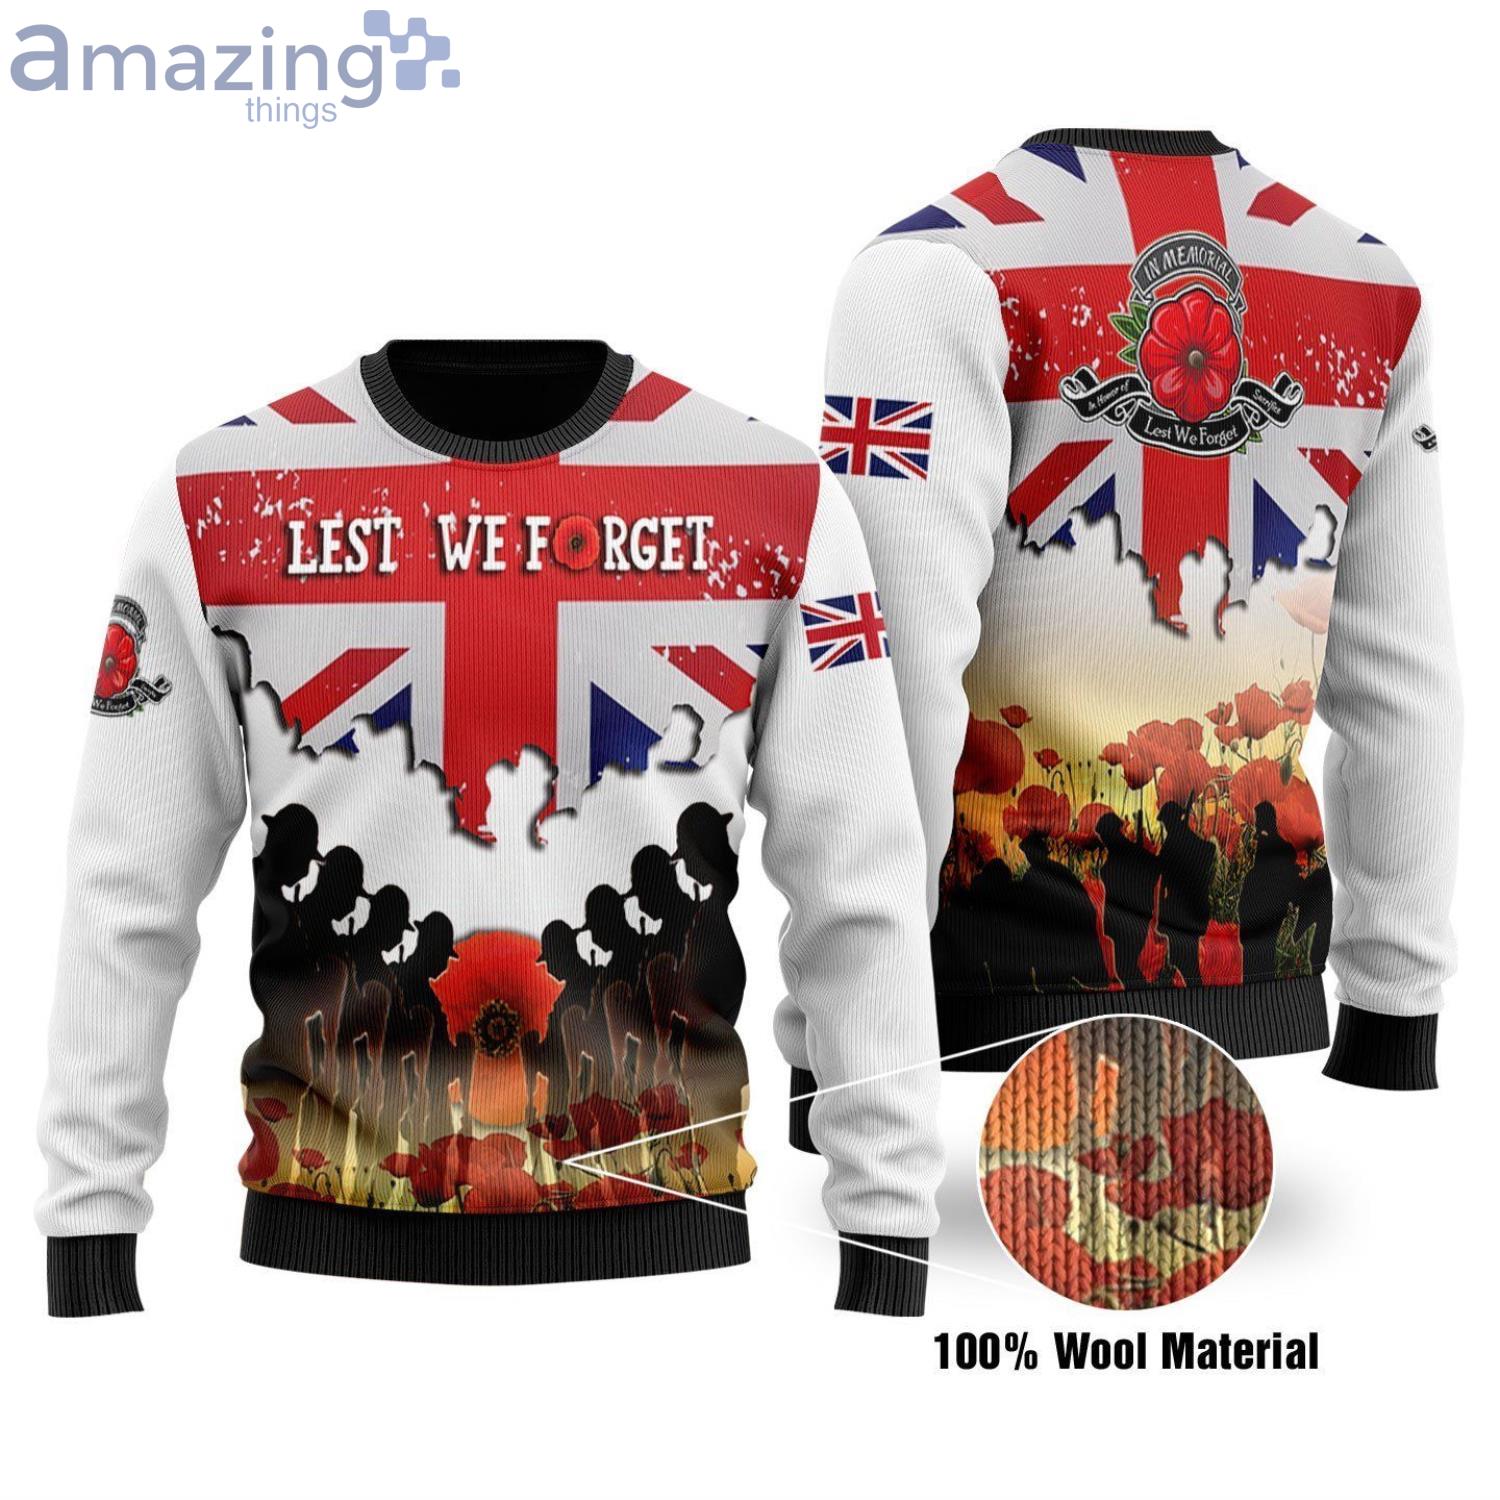 United Kingdom Veterans Lest We Forget Christmas Ugly Sweater Product Photo 1 Product photo 1